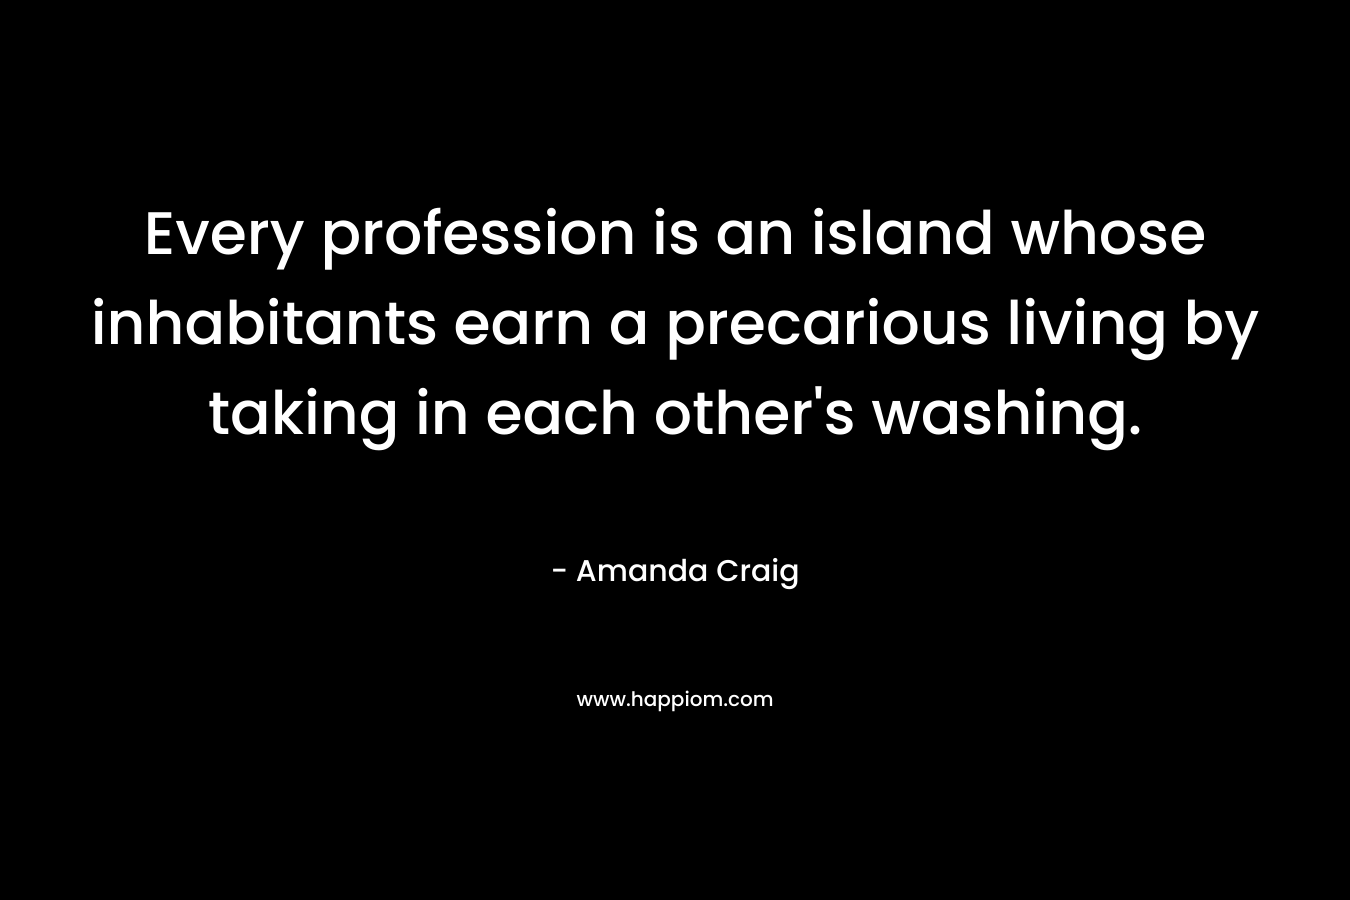 Every profession is an island whose inhabitants earn a precarious living by taking in each other’s washing. – Amanda Craig